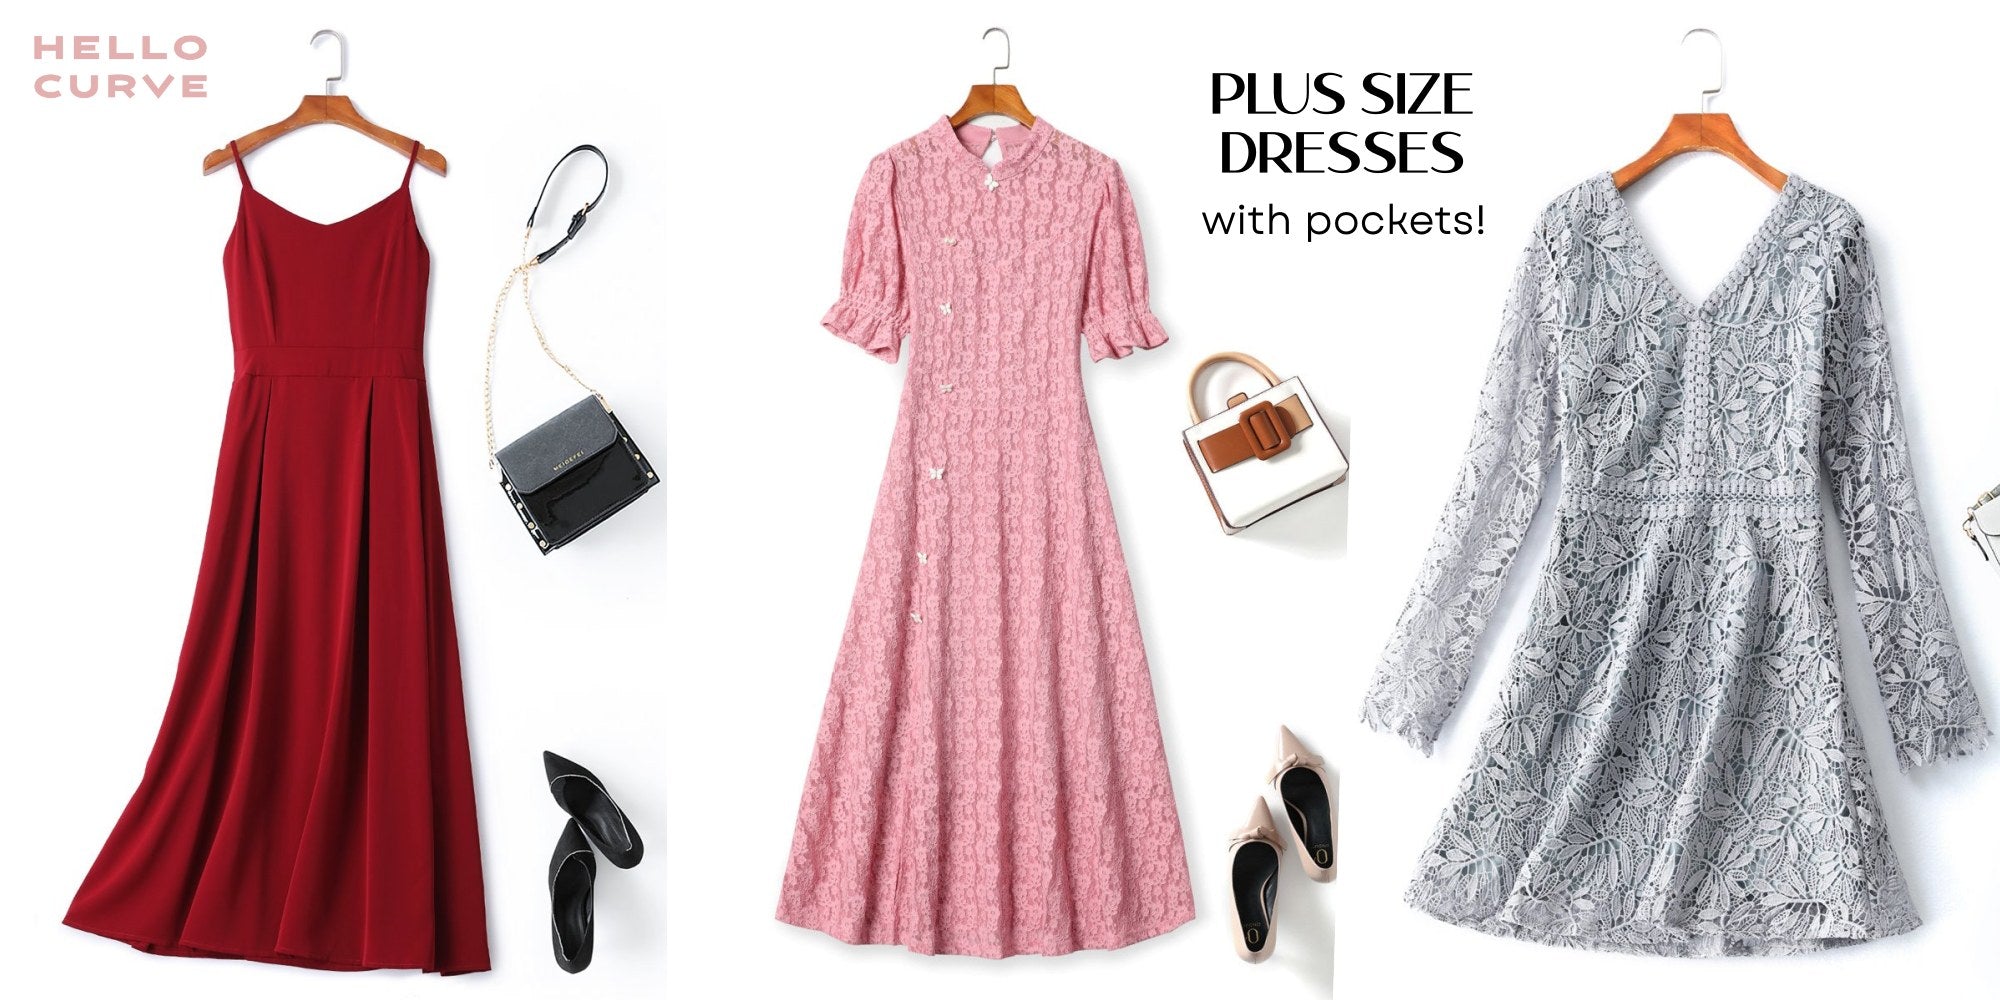 Fashion Forward: The Evolution of Plus Size Dresses with Pockets